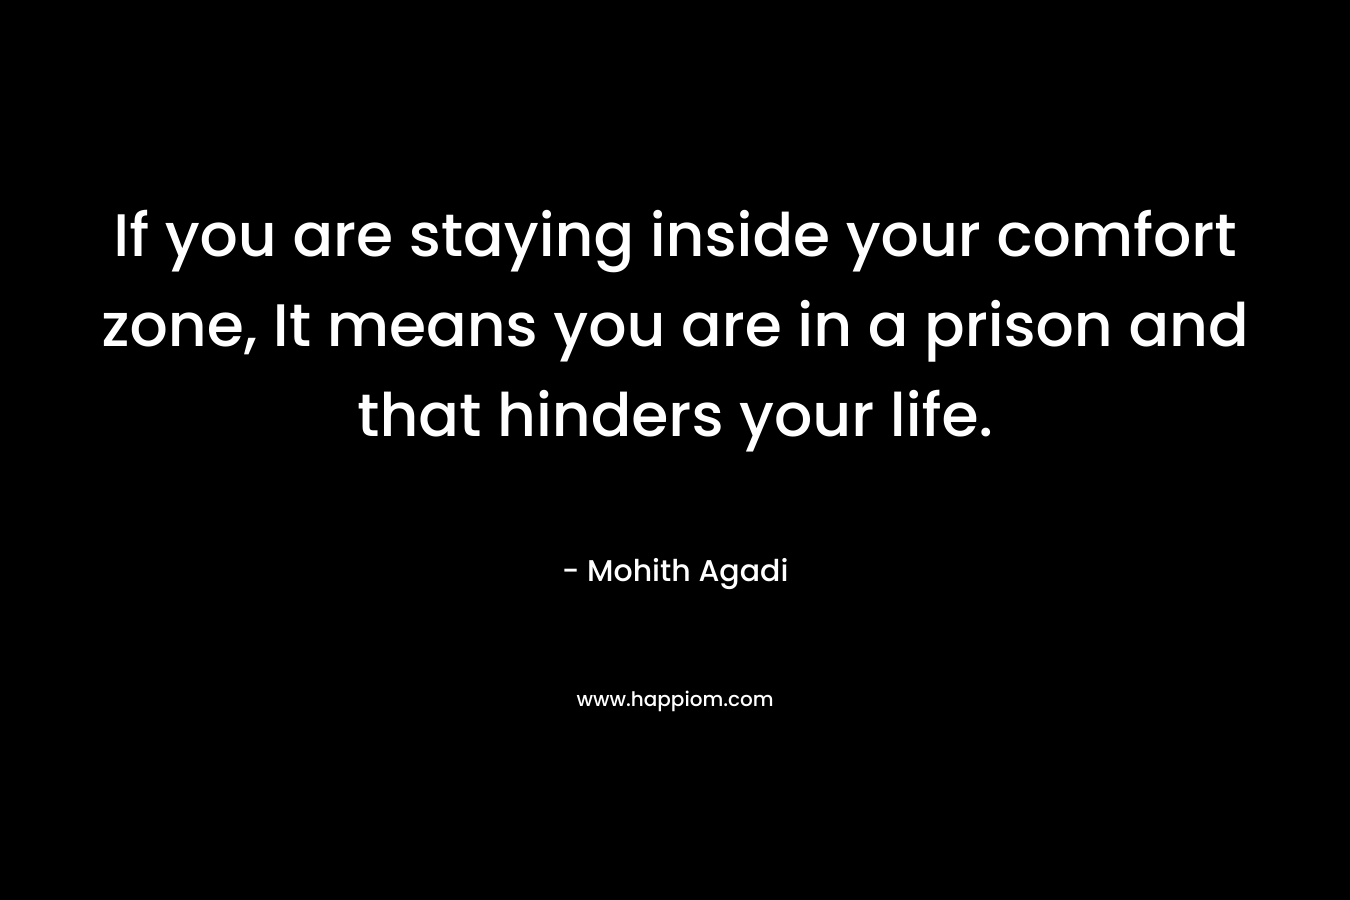 If you are staying inside your comfort zone, It means you are in a prison and that hinders your life.